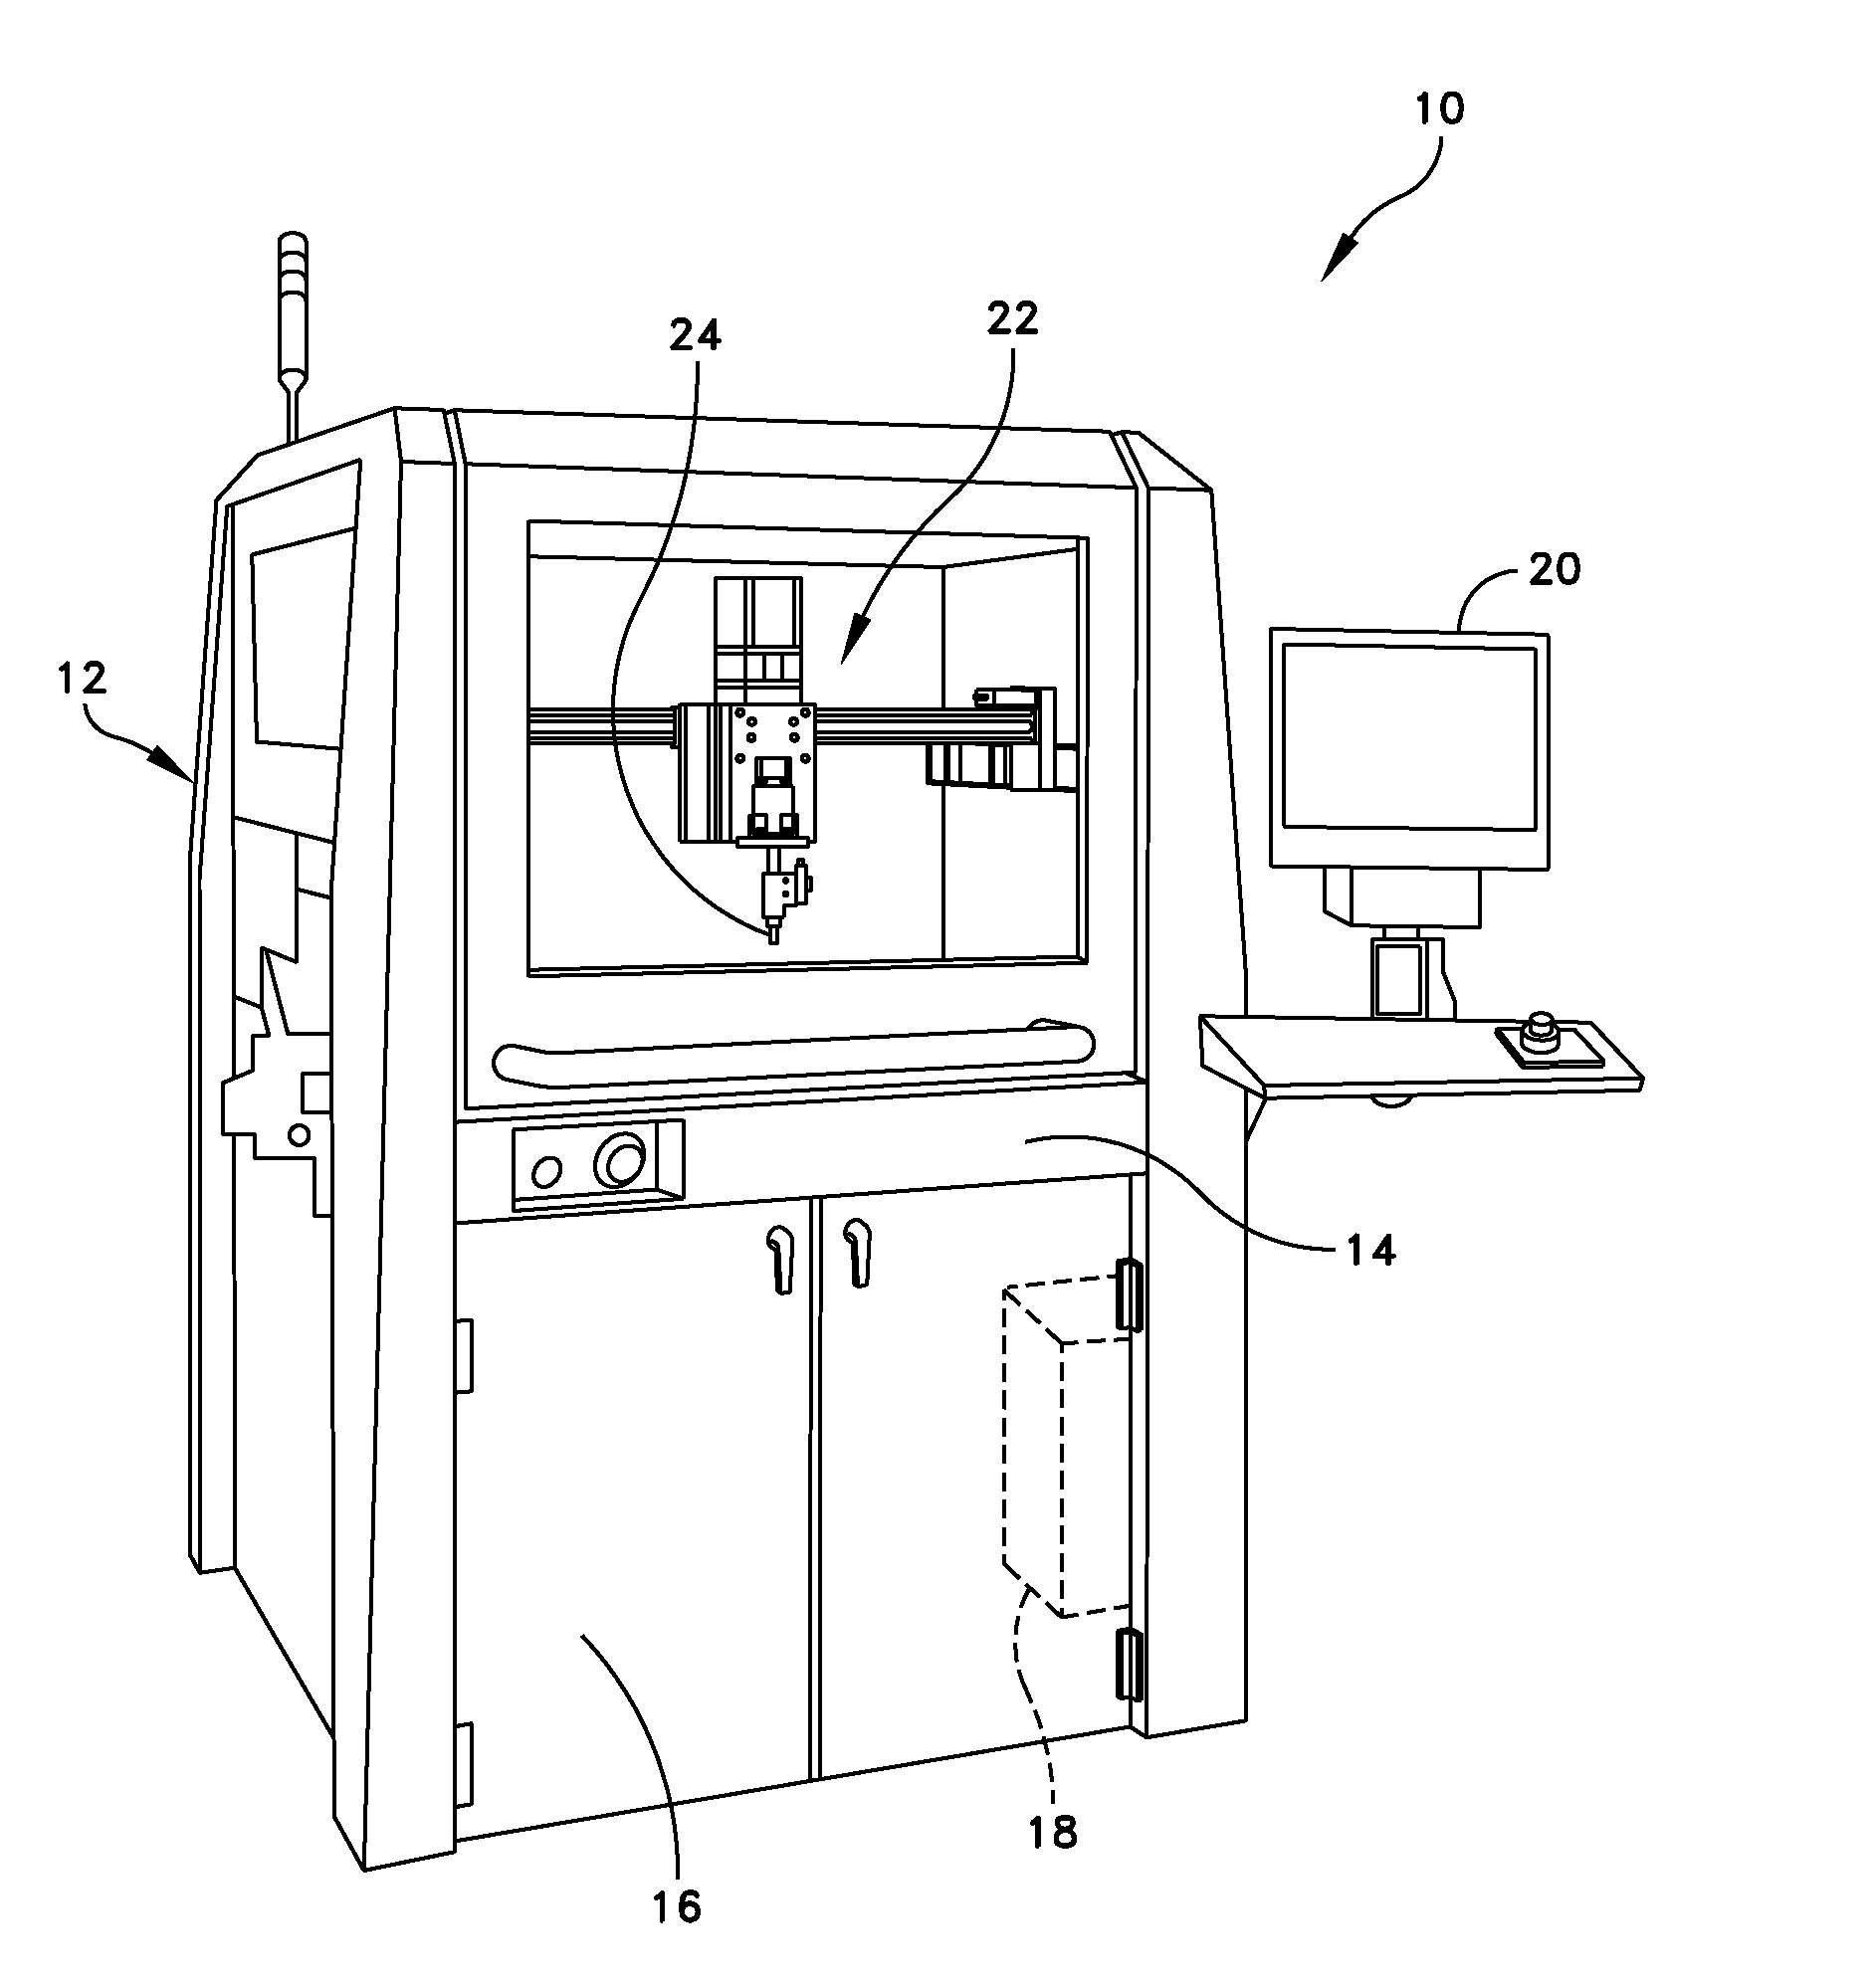 Apparatus and method for spray coating